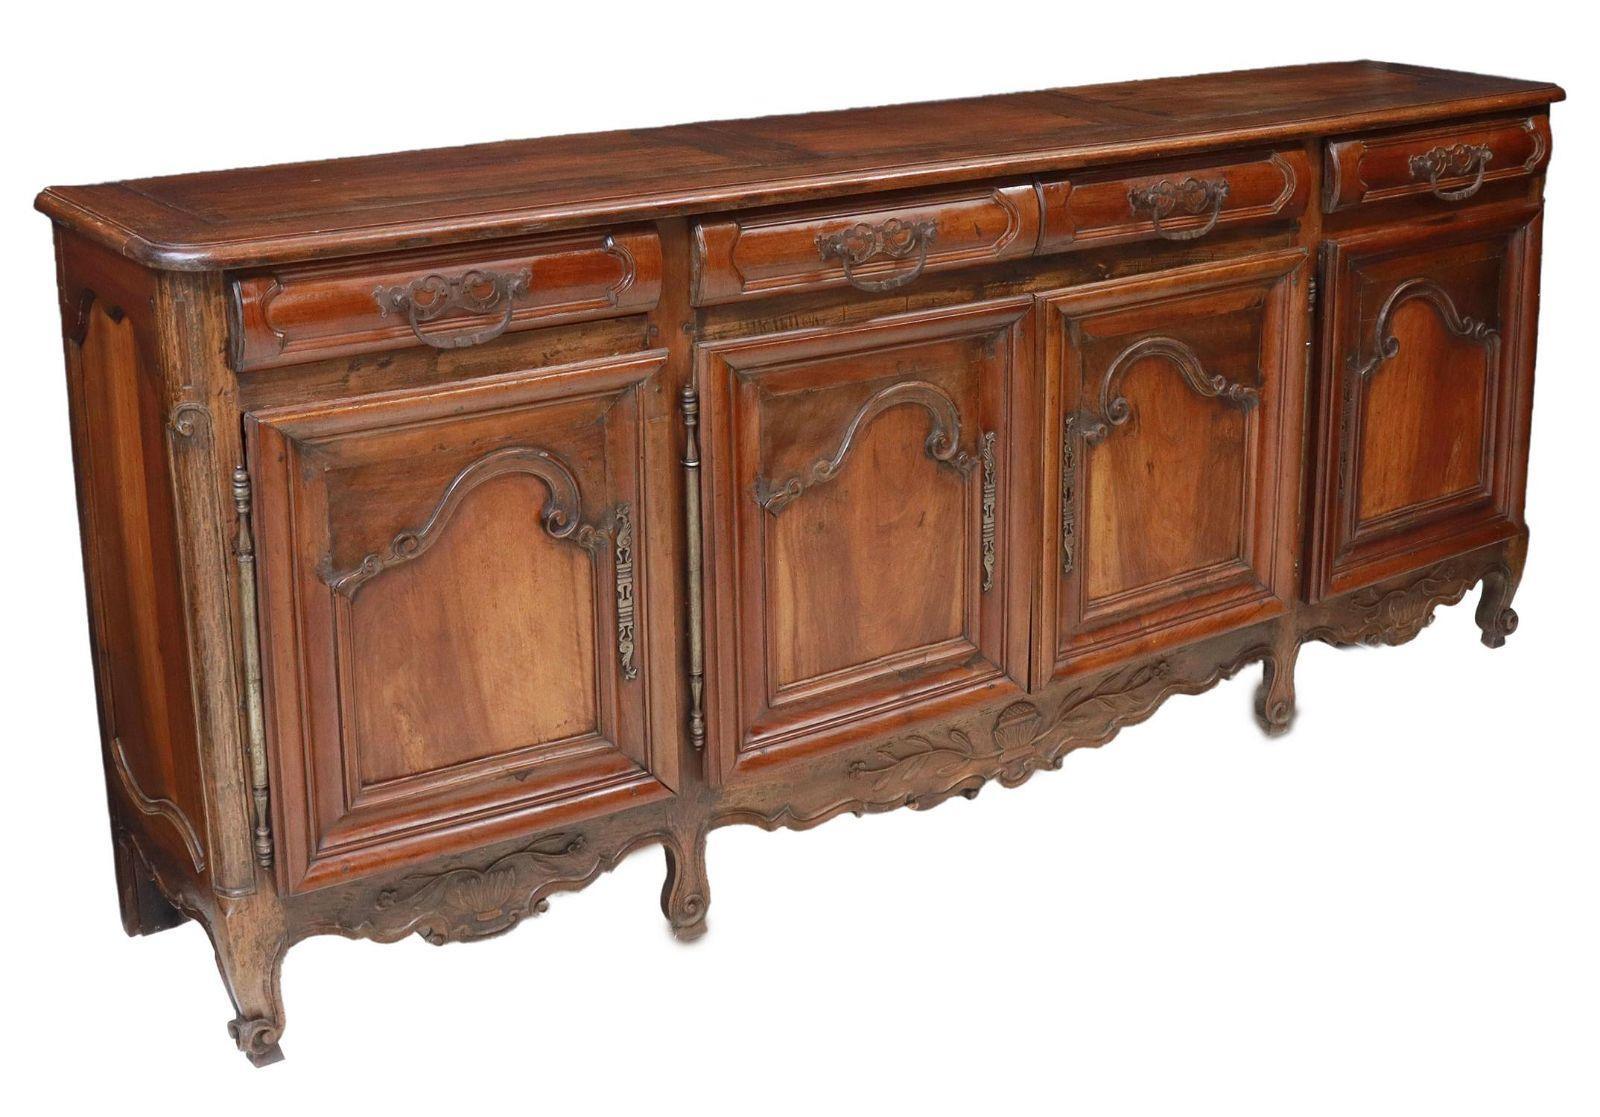 Large and tall French Provincial Louis XV style walnut sideboard, early to mid 19th c.. This sideboard has four iron pull drawers over four paneled doors on exposed hinges, rising on whorl feet. Beautifully carved detail seen throughout. Note: iron